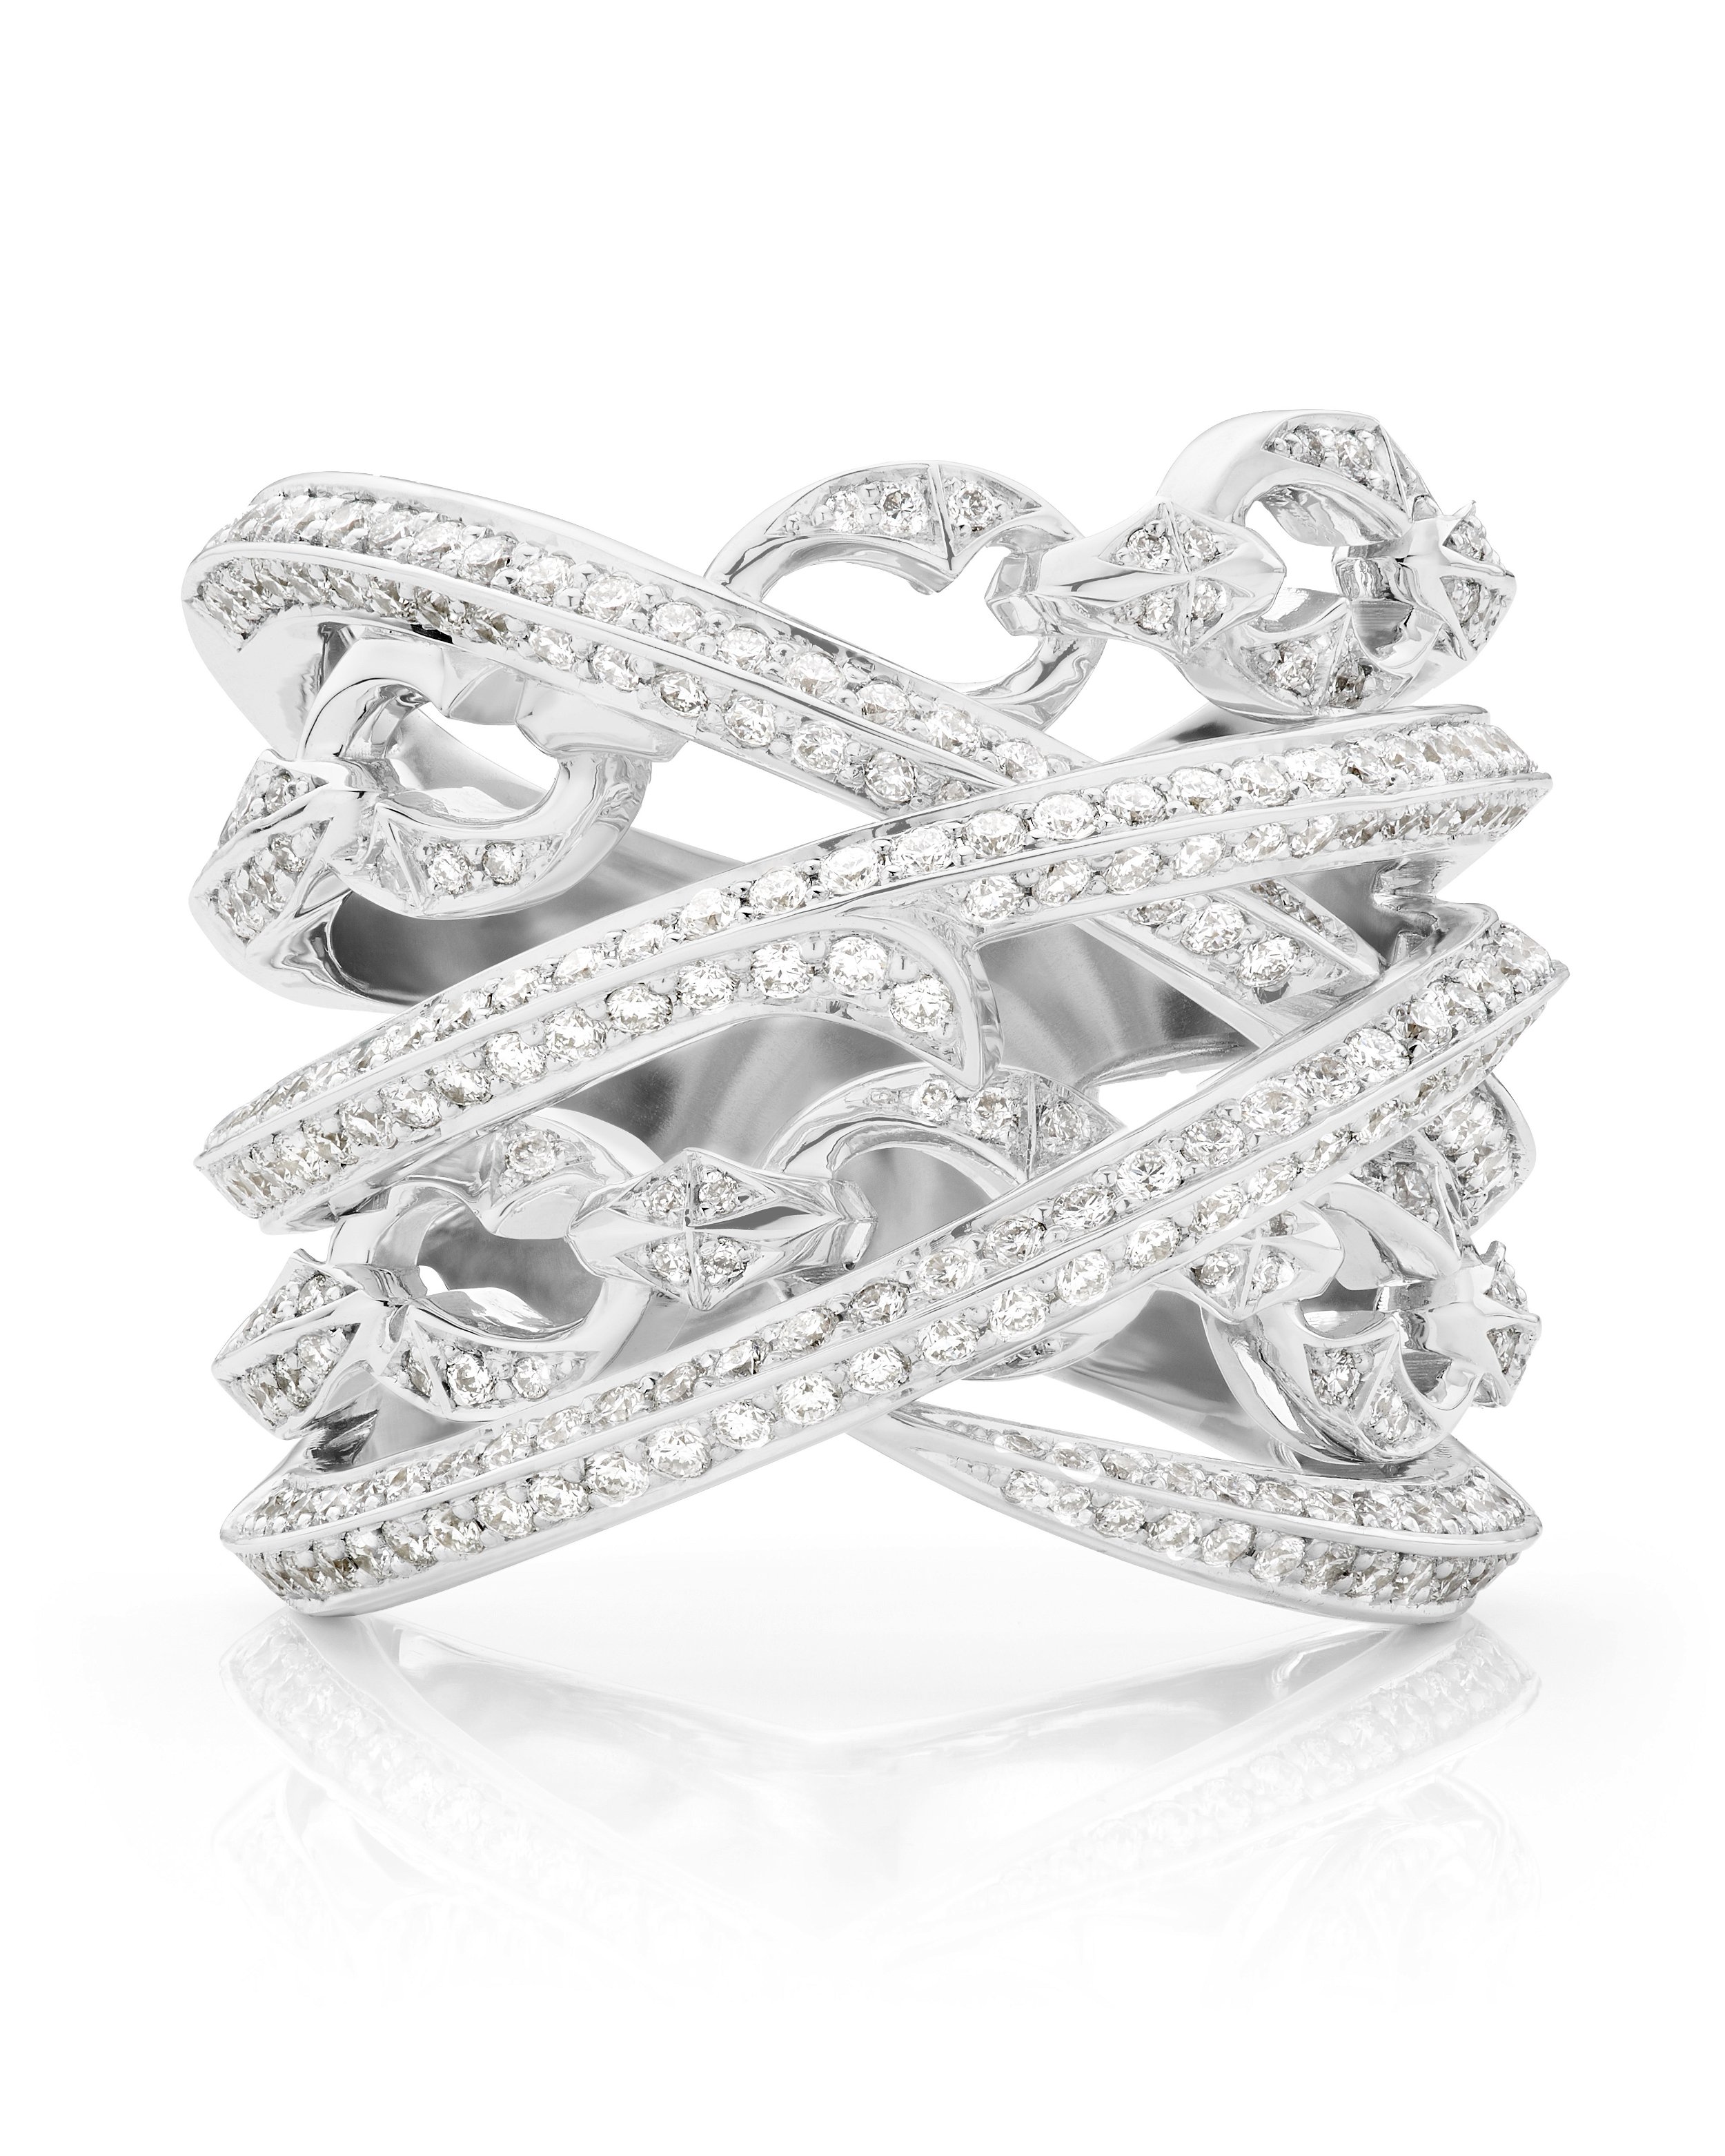 Thorn Embrace Bound Together Large Band Ring with White Diamonds in 18kt White Gold - Size 7